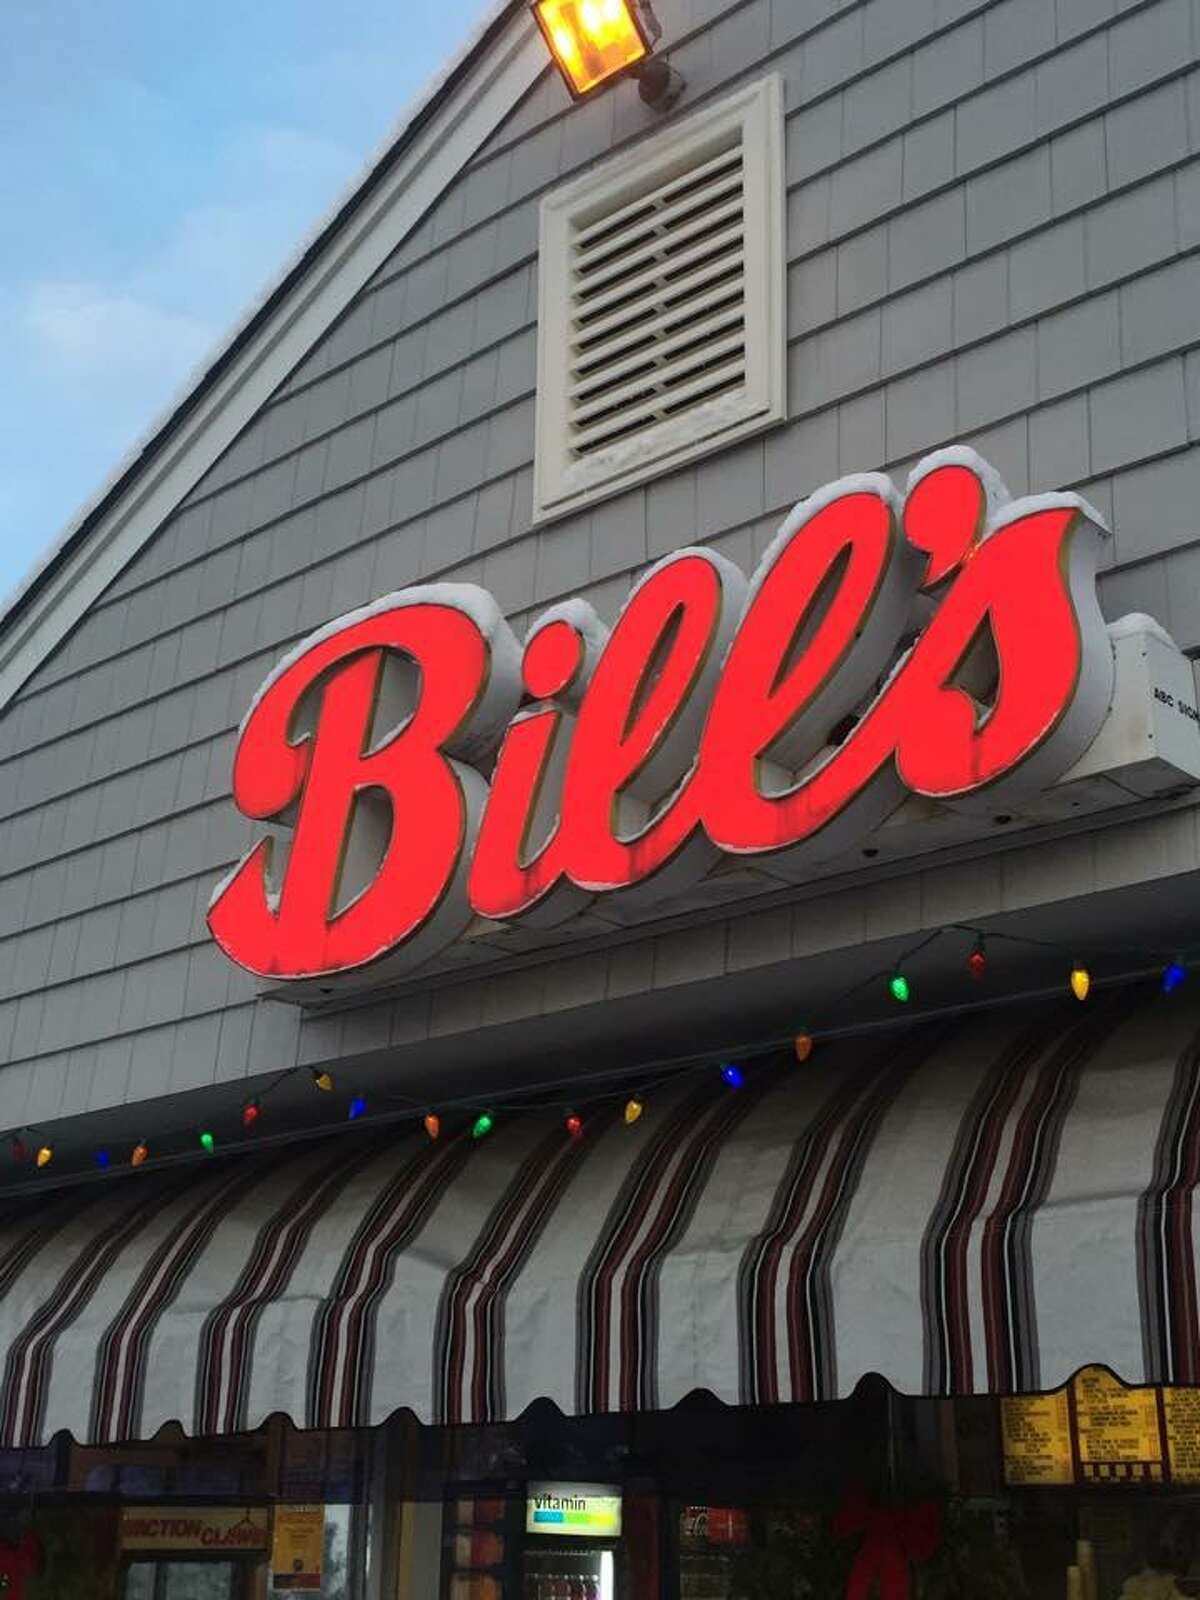 William Boyko, former proprietor of Bill's Drive-In in Monroe, died Jan. 31, at age 82.